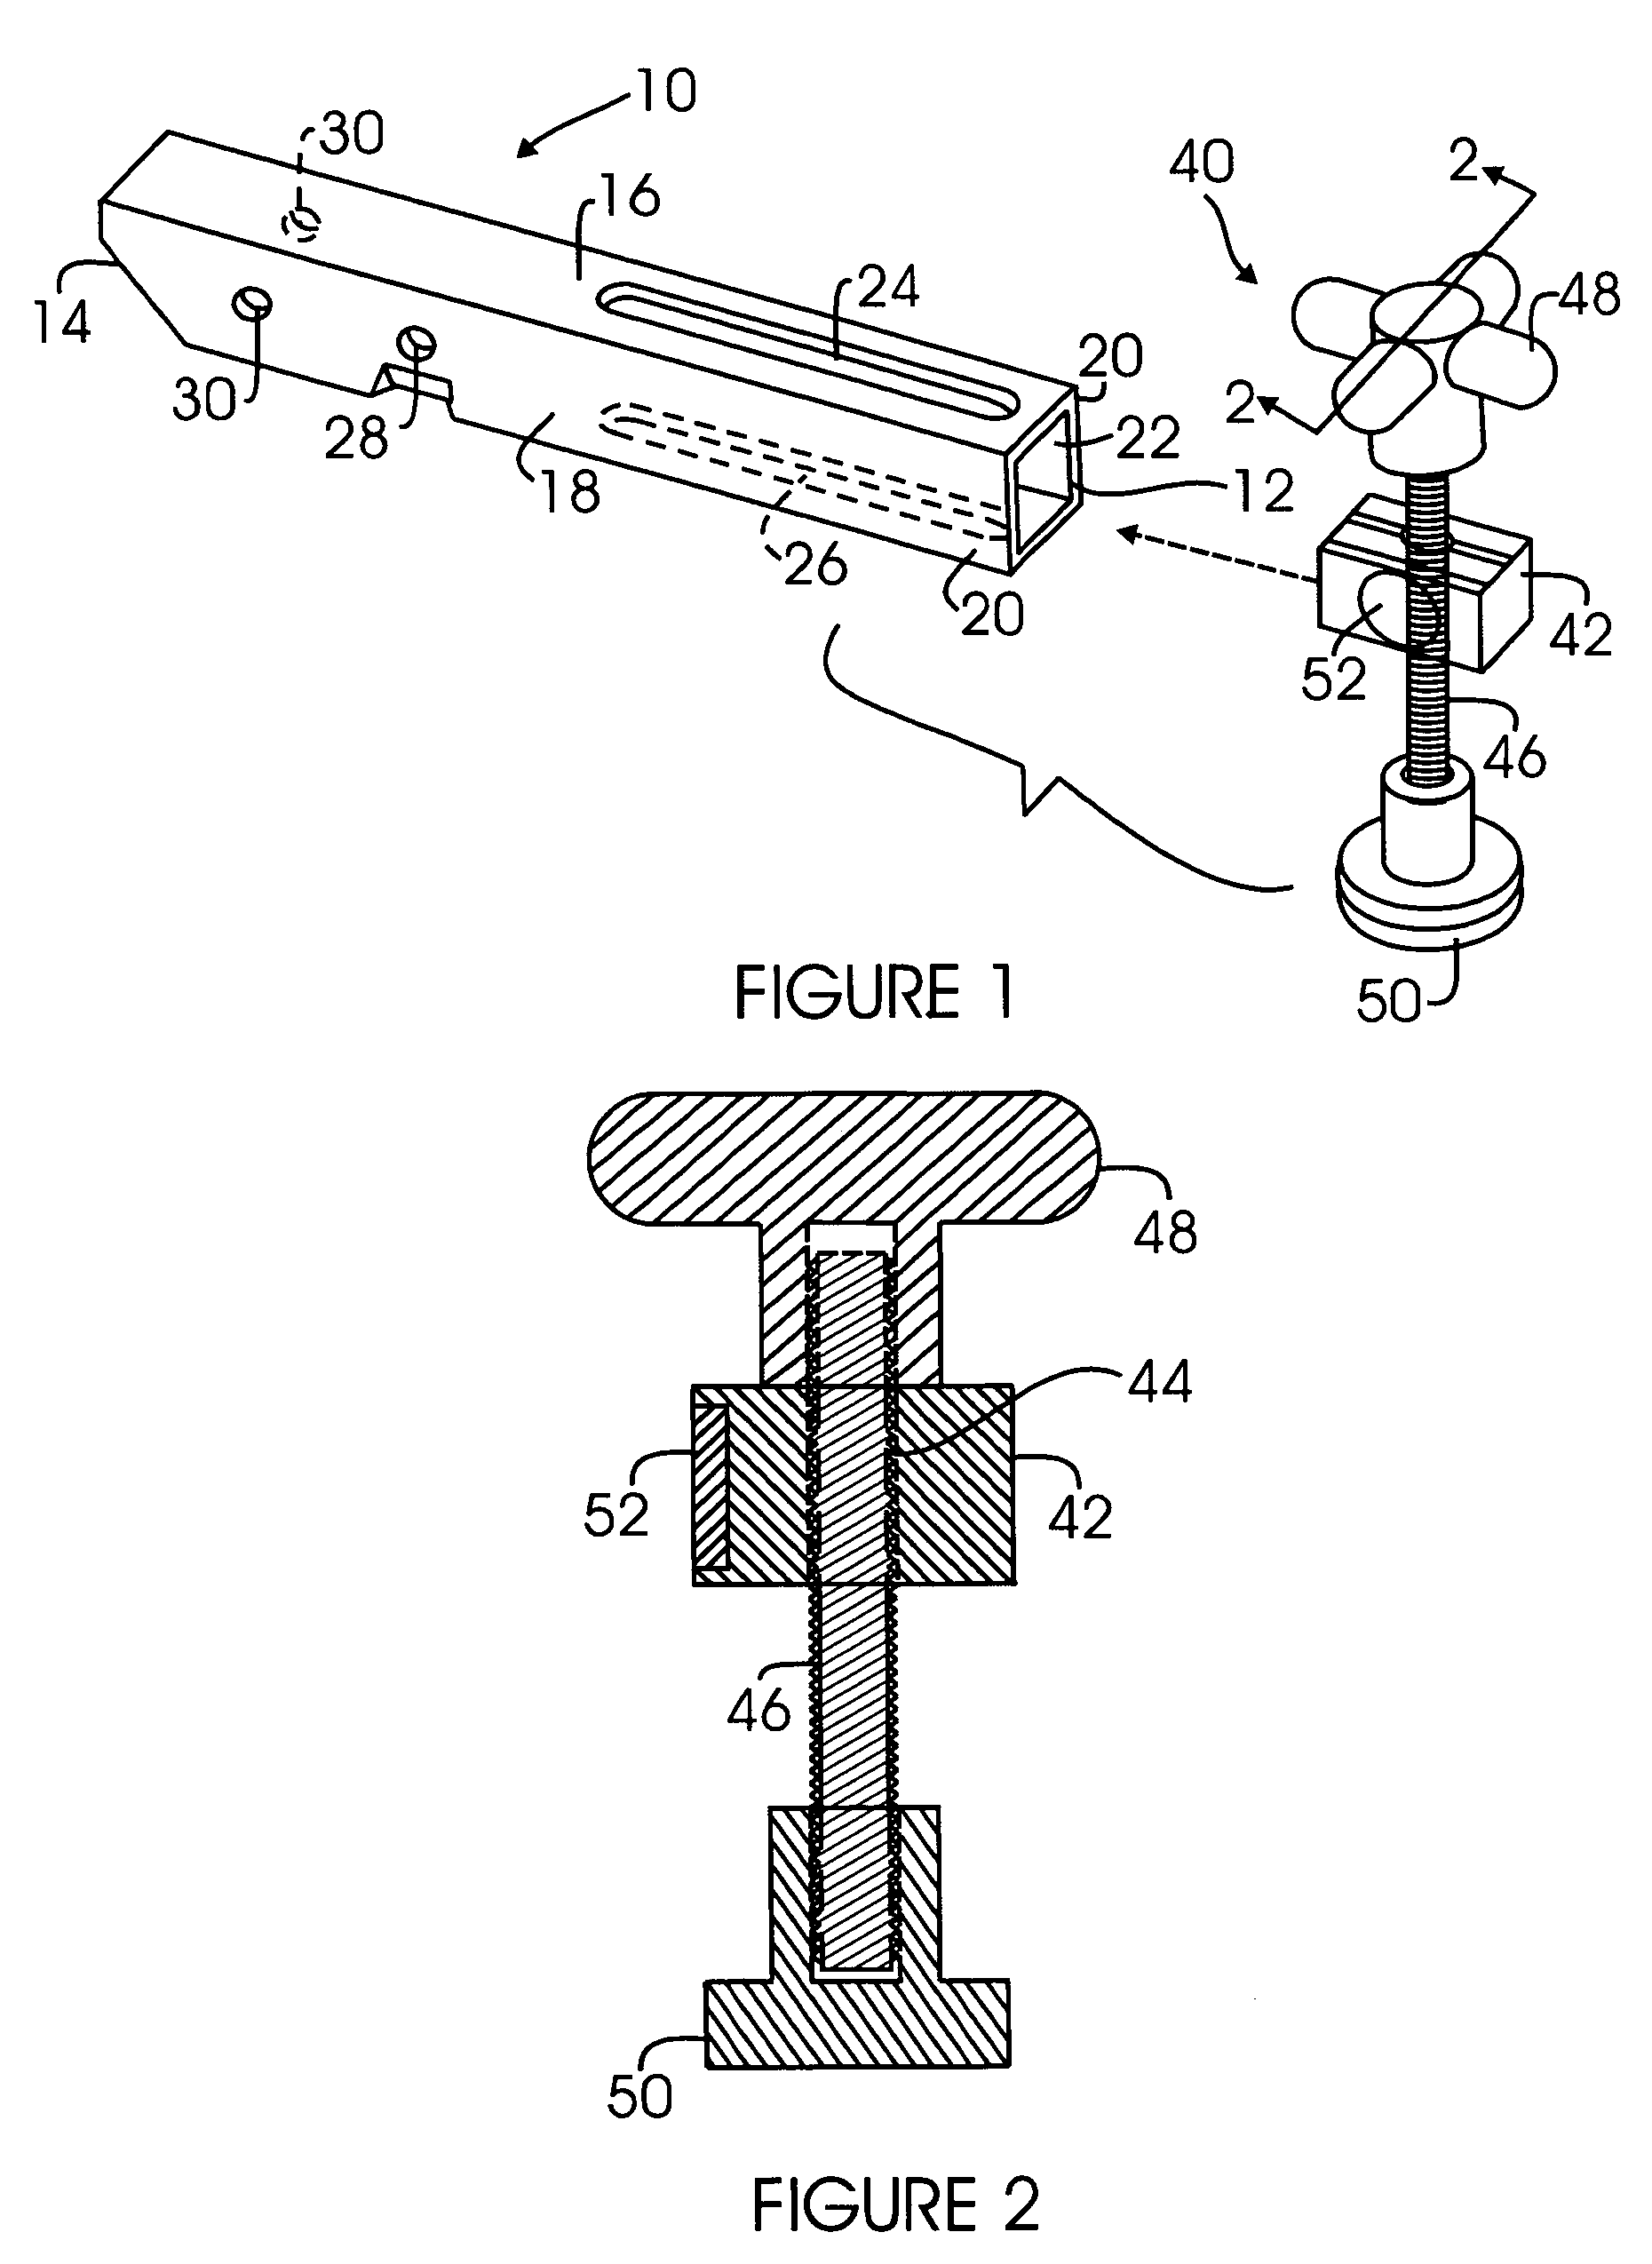 Clamp with magnetic spindle positioner